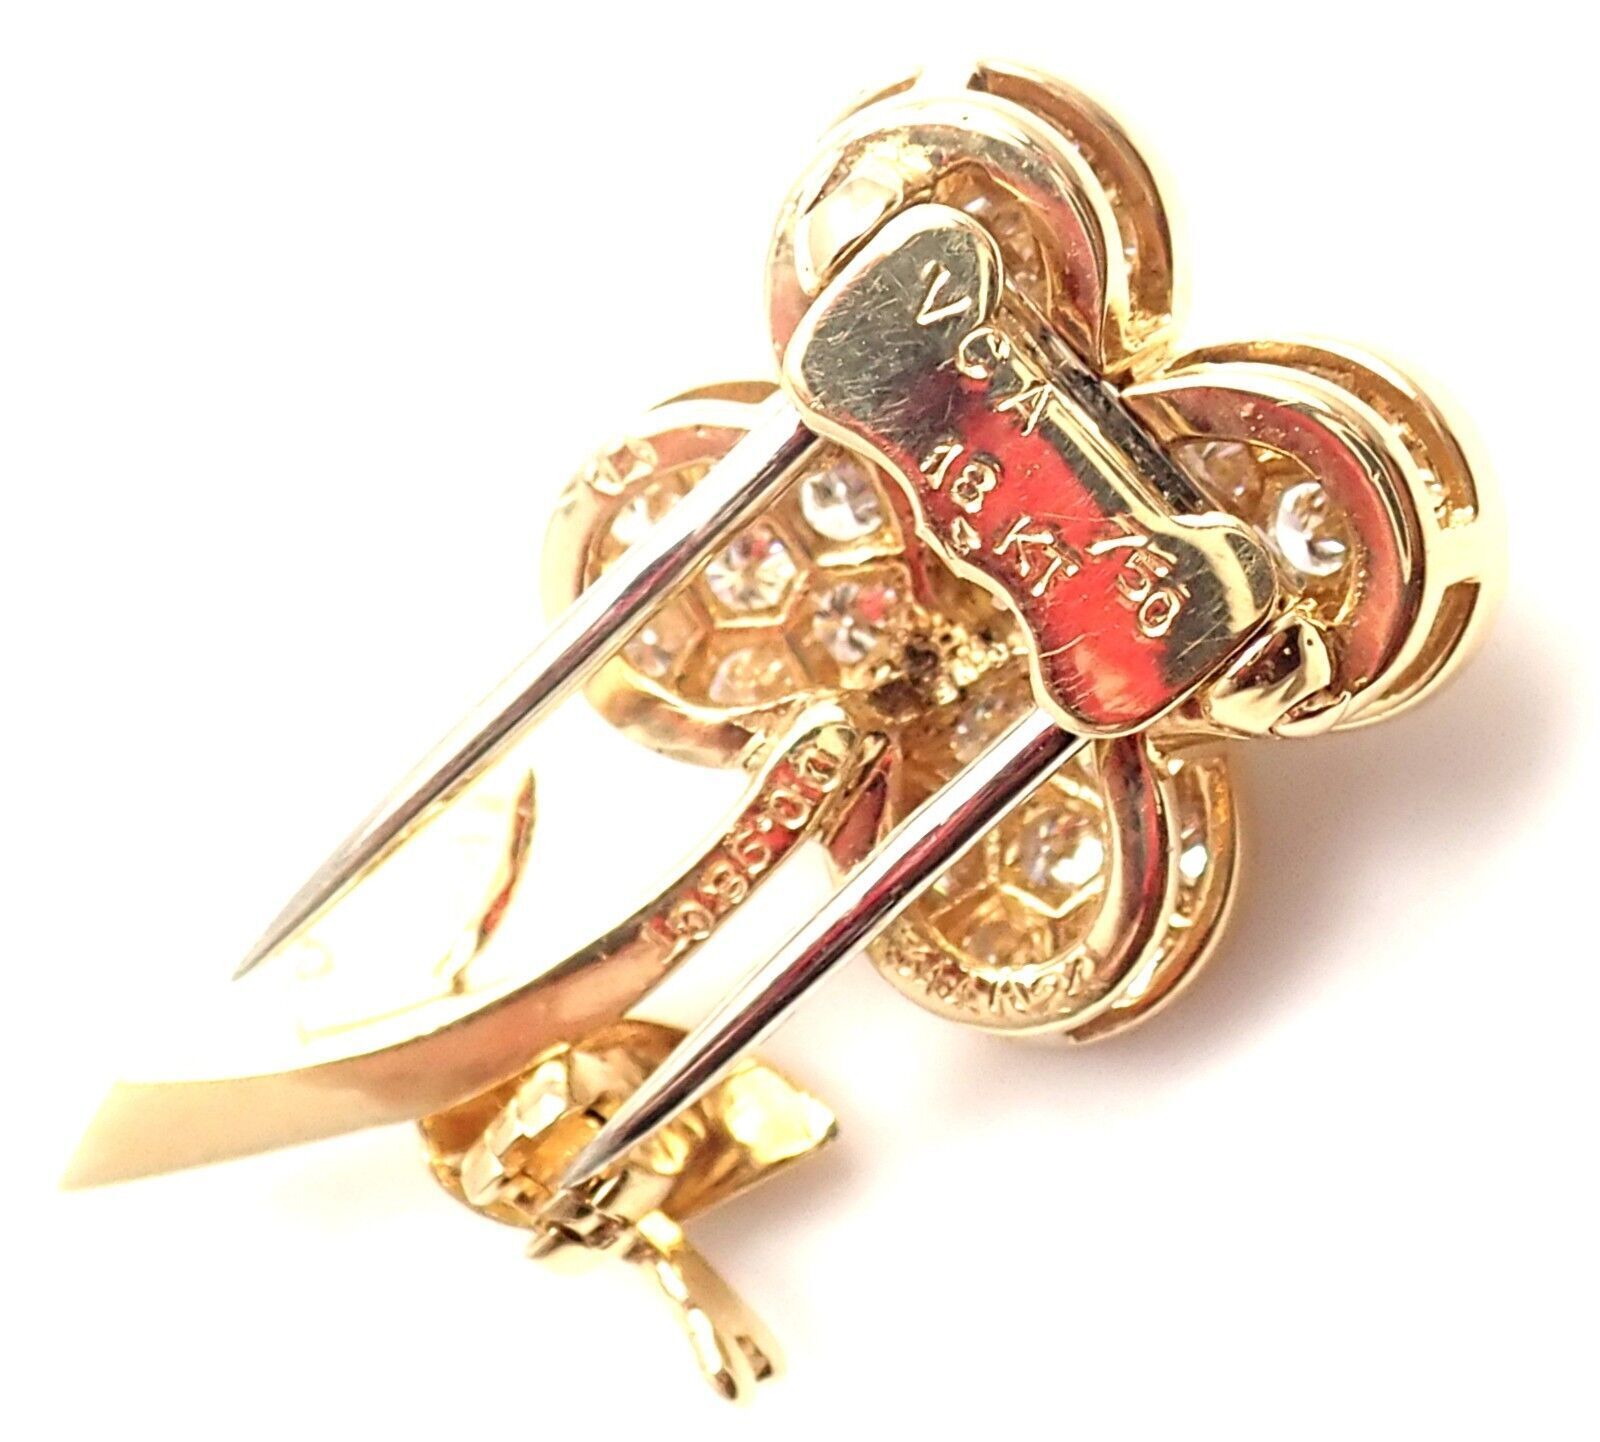 Van Cleef & Arpels Jewelry & Watches:Fine Jewelry:Brooches & Pins Rare! Authentic Van Cleef & Arpels Diamond 18k Yellow Gold Flower Pin Brooch